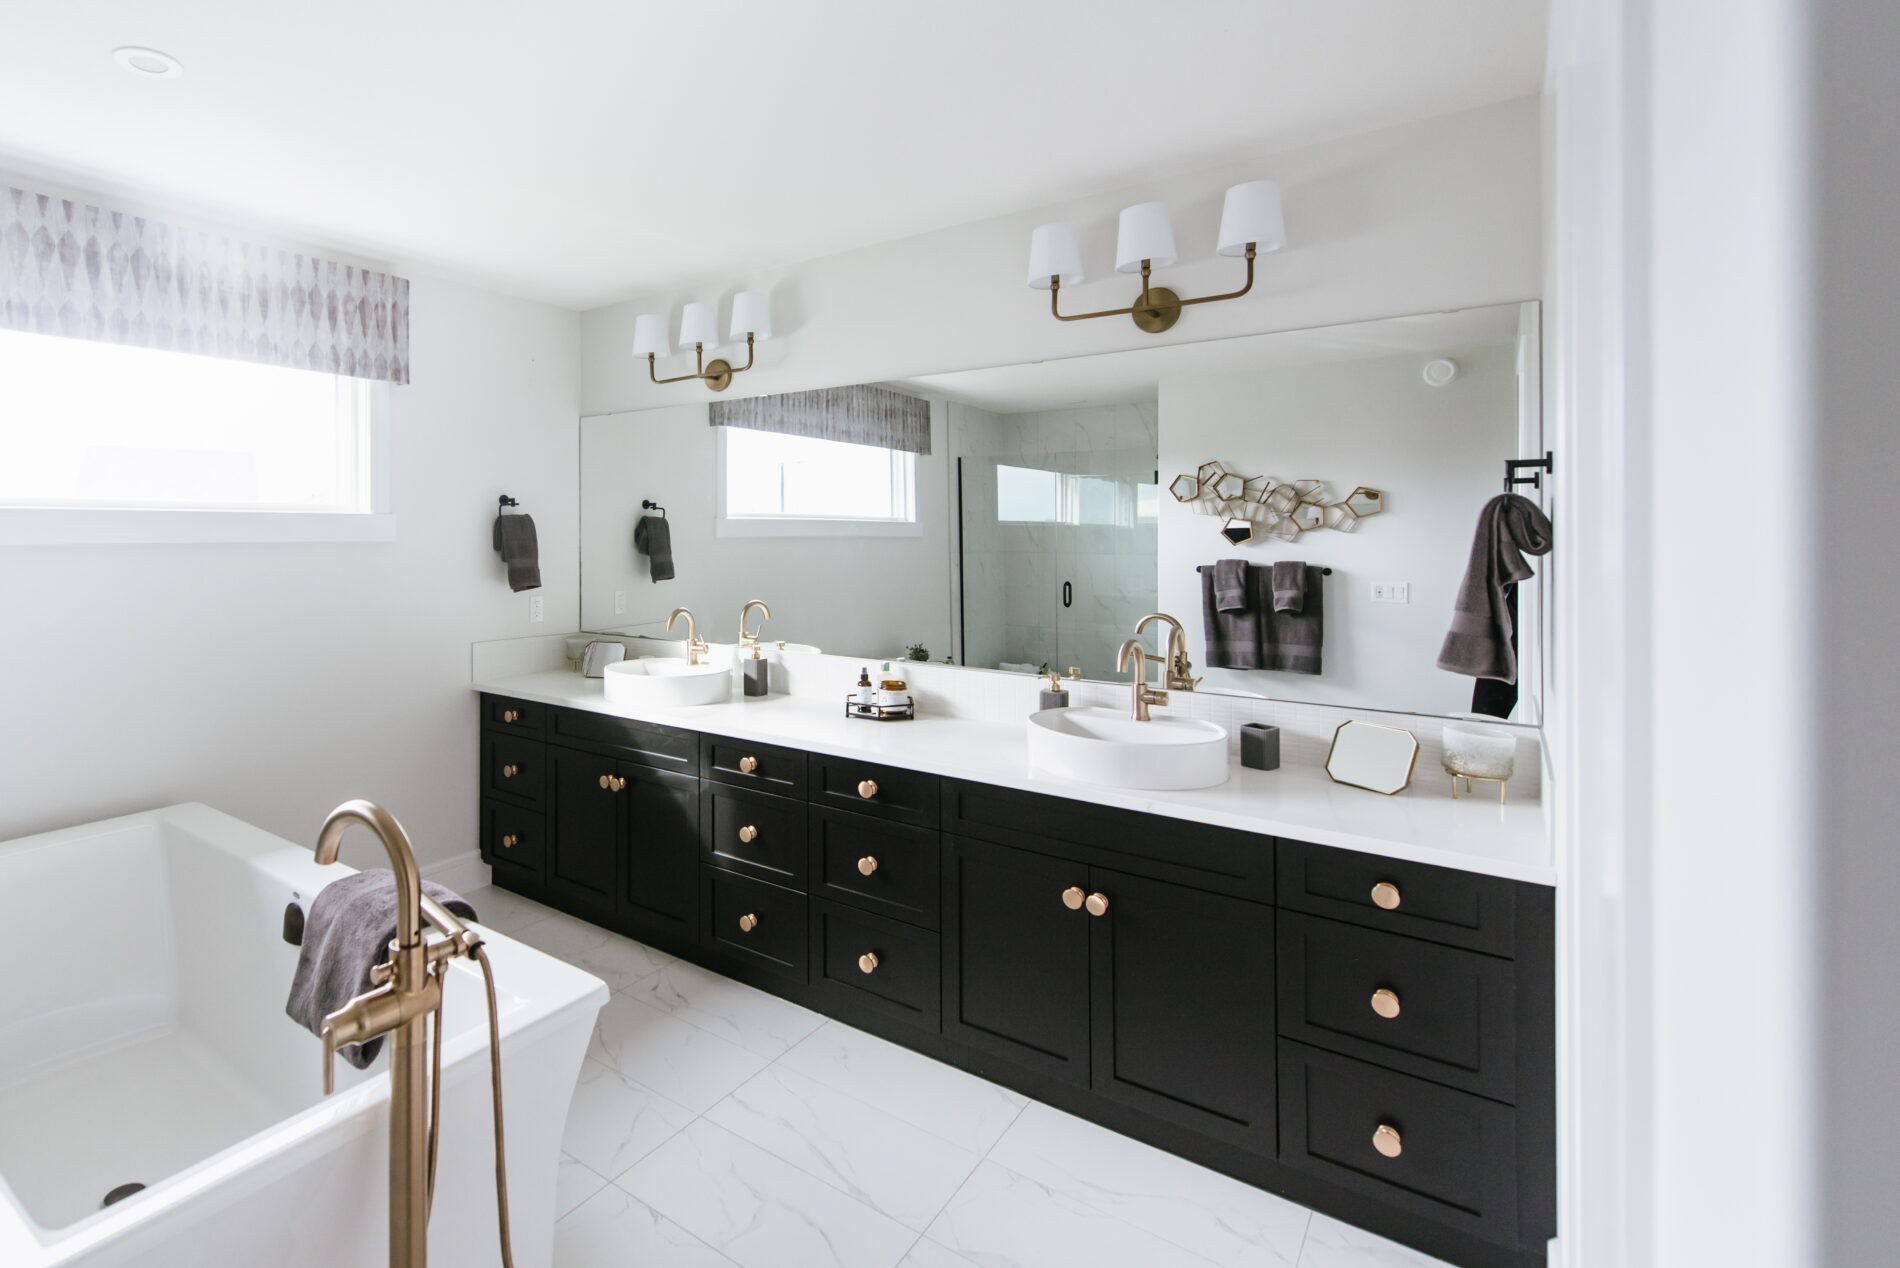 Master ensuite in the Kail showhome featuring luxurious black dual vanity with large gold handles, vessel sinks with gold faucets, a free standing tub in the middle of the room with a gold tub filler and the fully tiled shower reflecting in the mirror